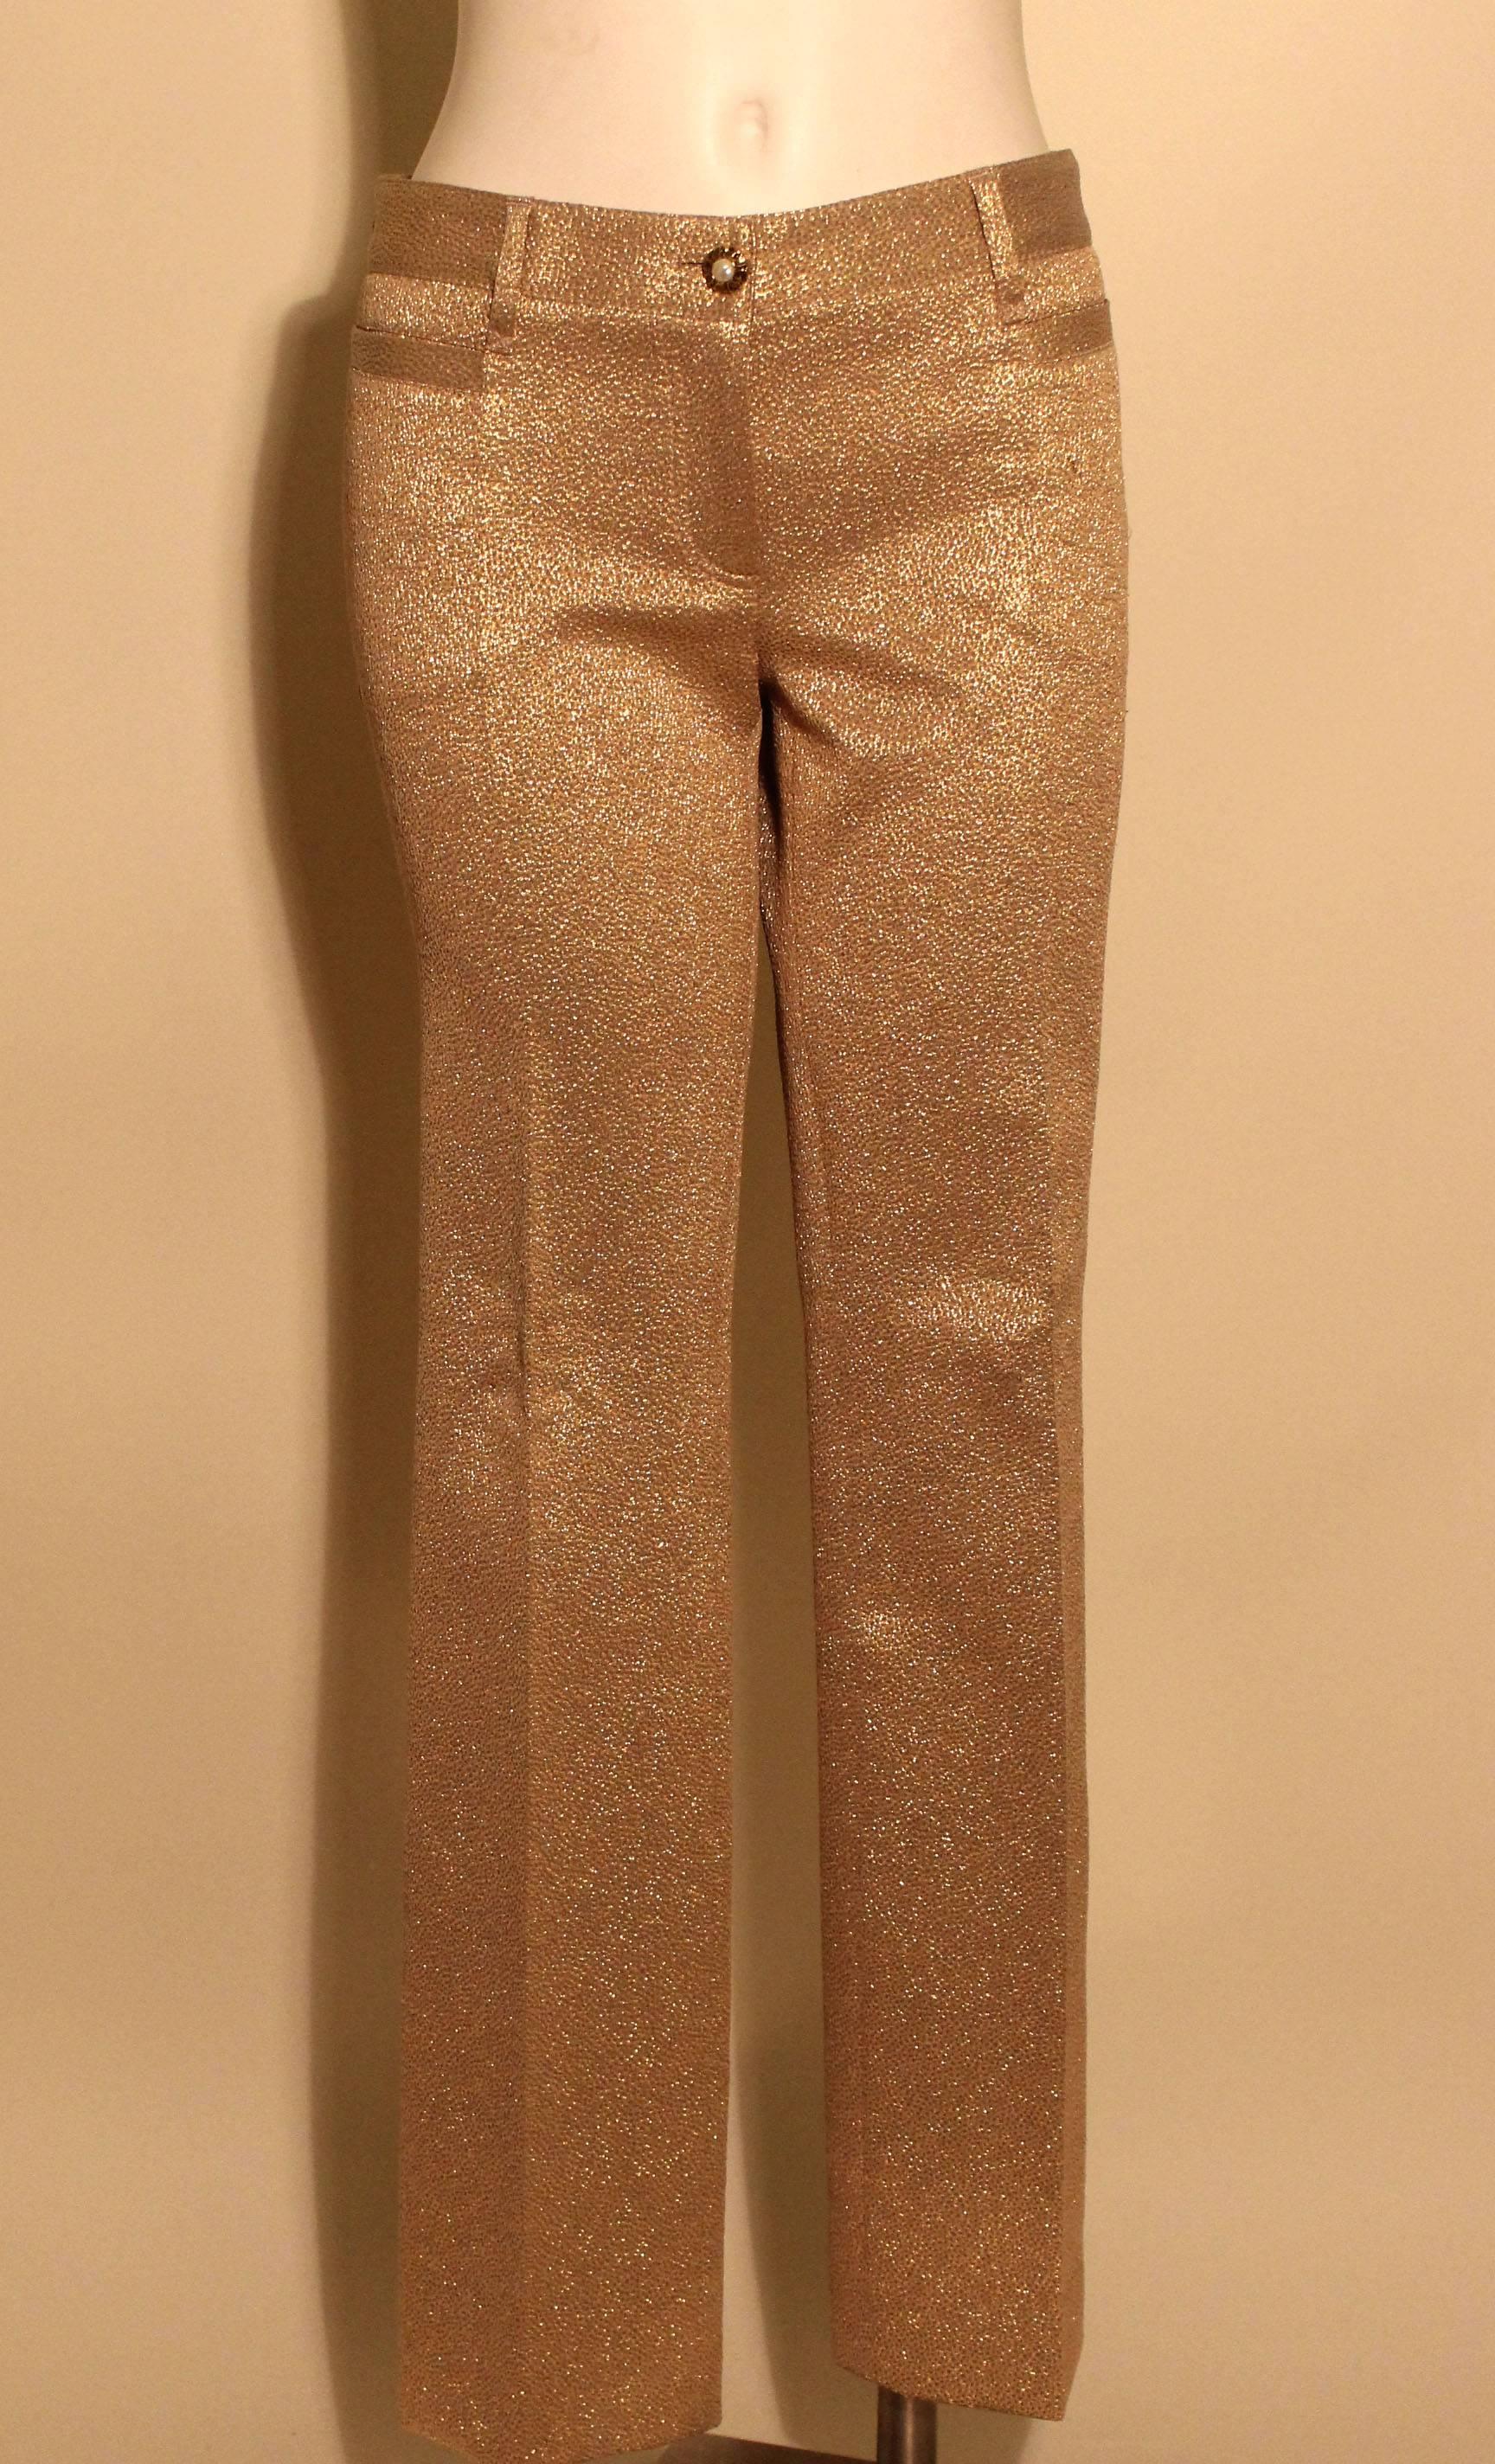 Dolce & Gabbana Metallic Gold Pant Suit For Sale 3